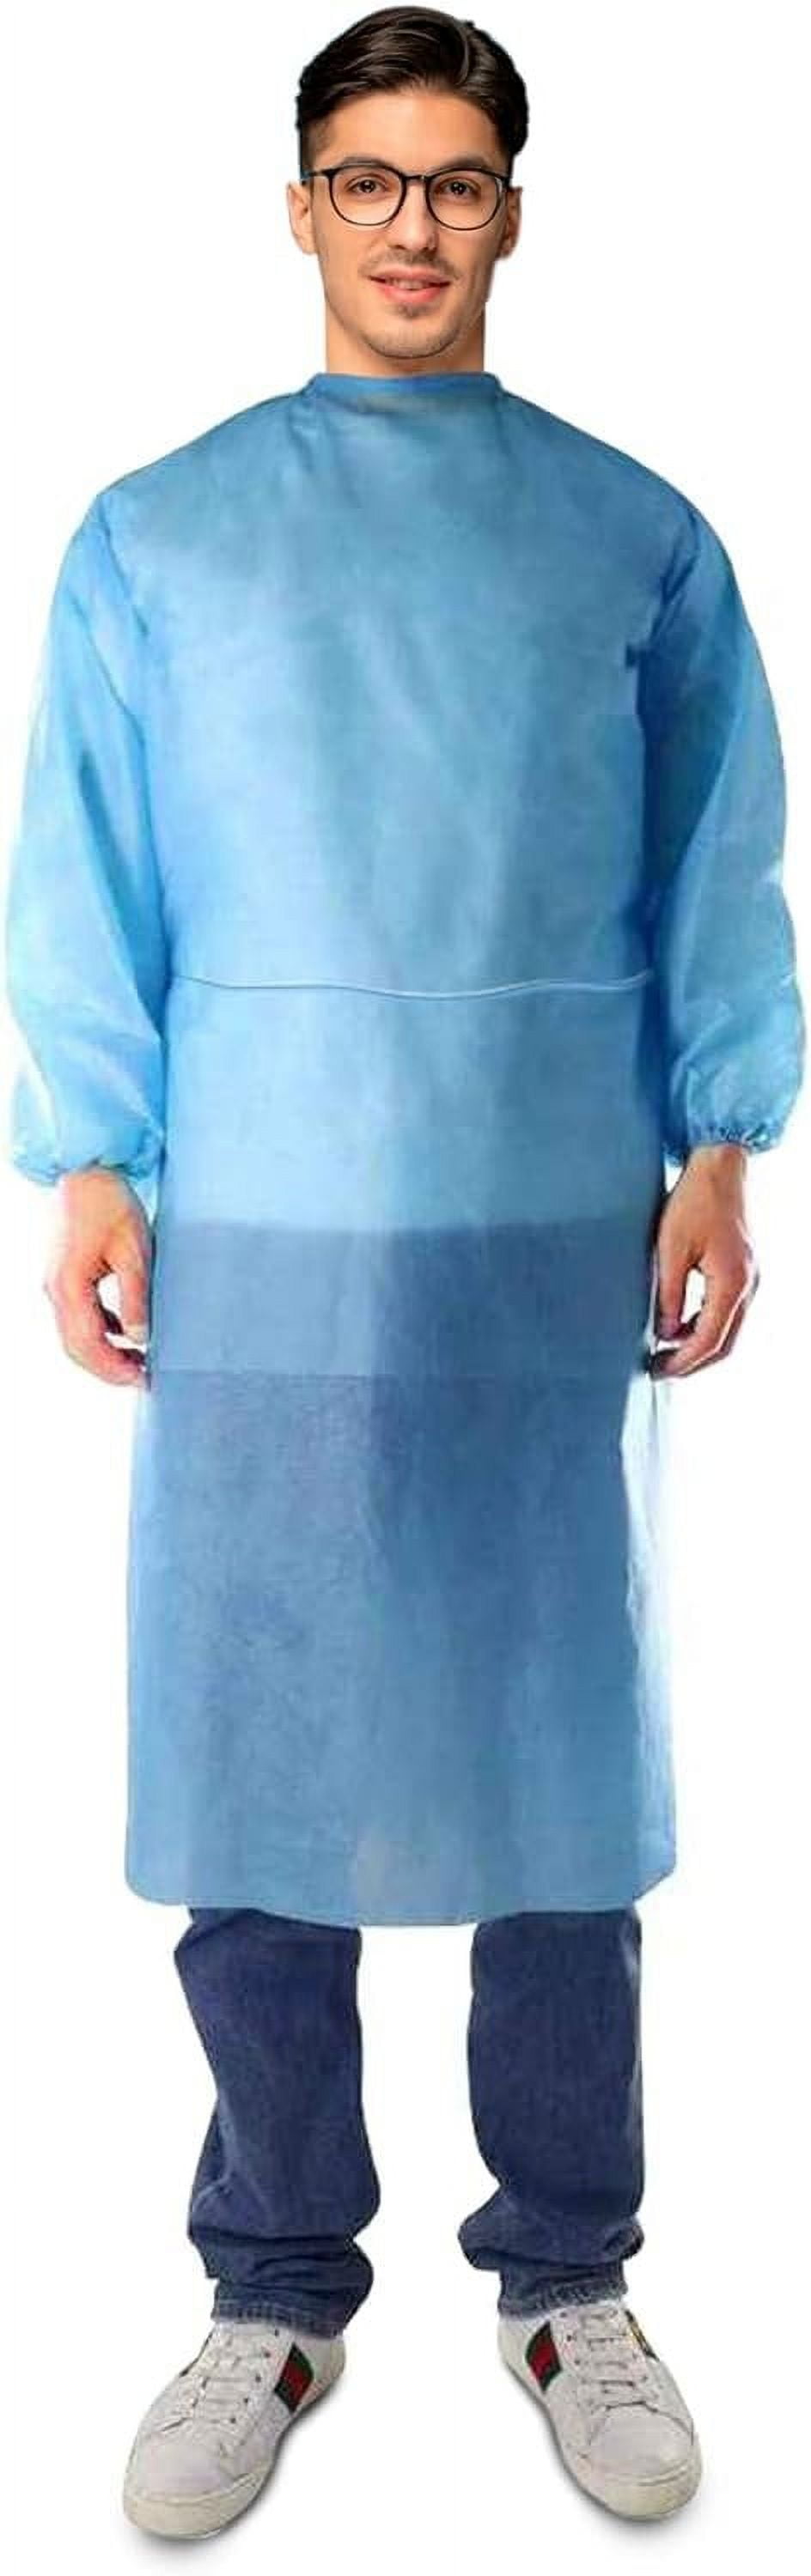 PPE-Level 2. Disposable Isolation Gowns. Open back tie, below knee, round  neck, long sleeves, thumb loops, color.blue